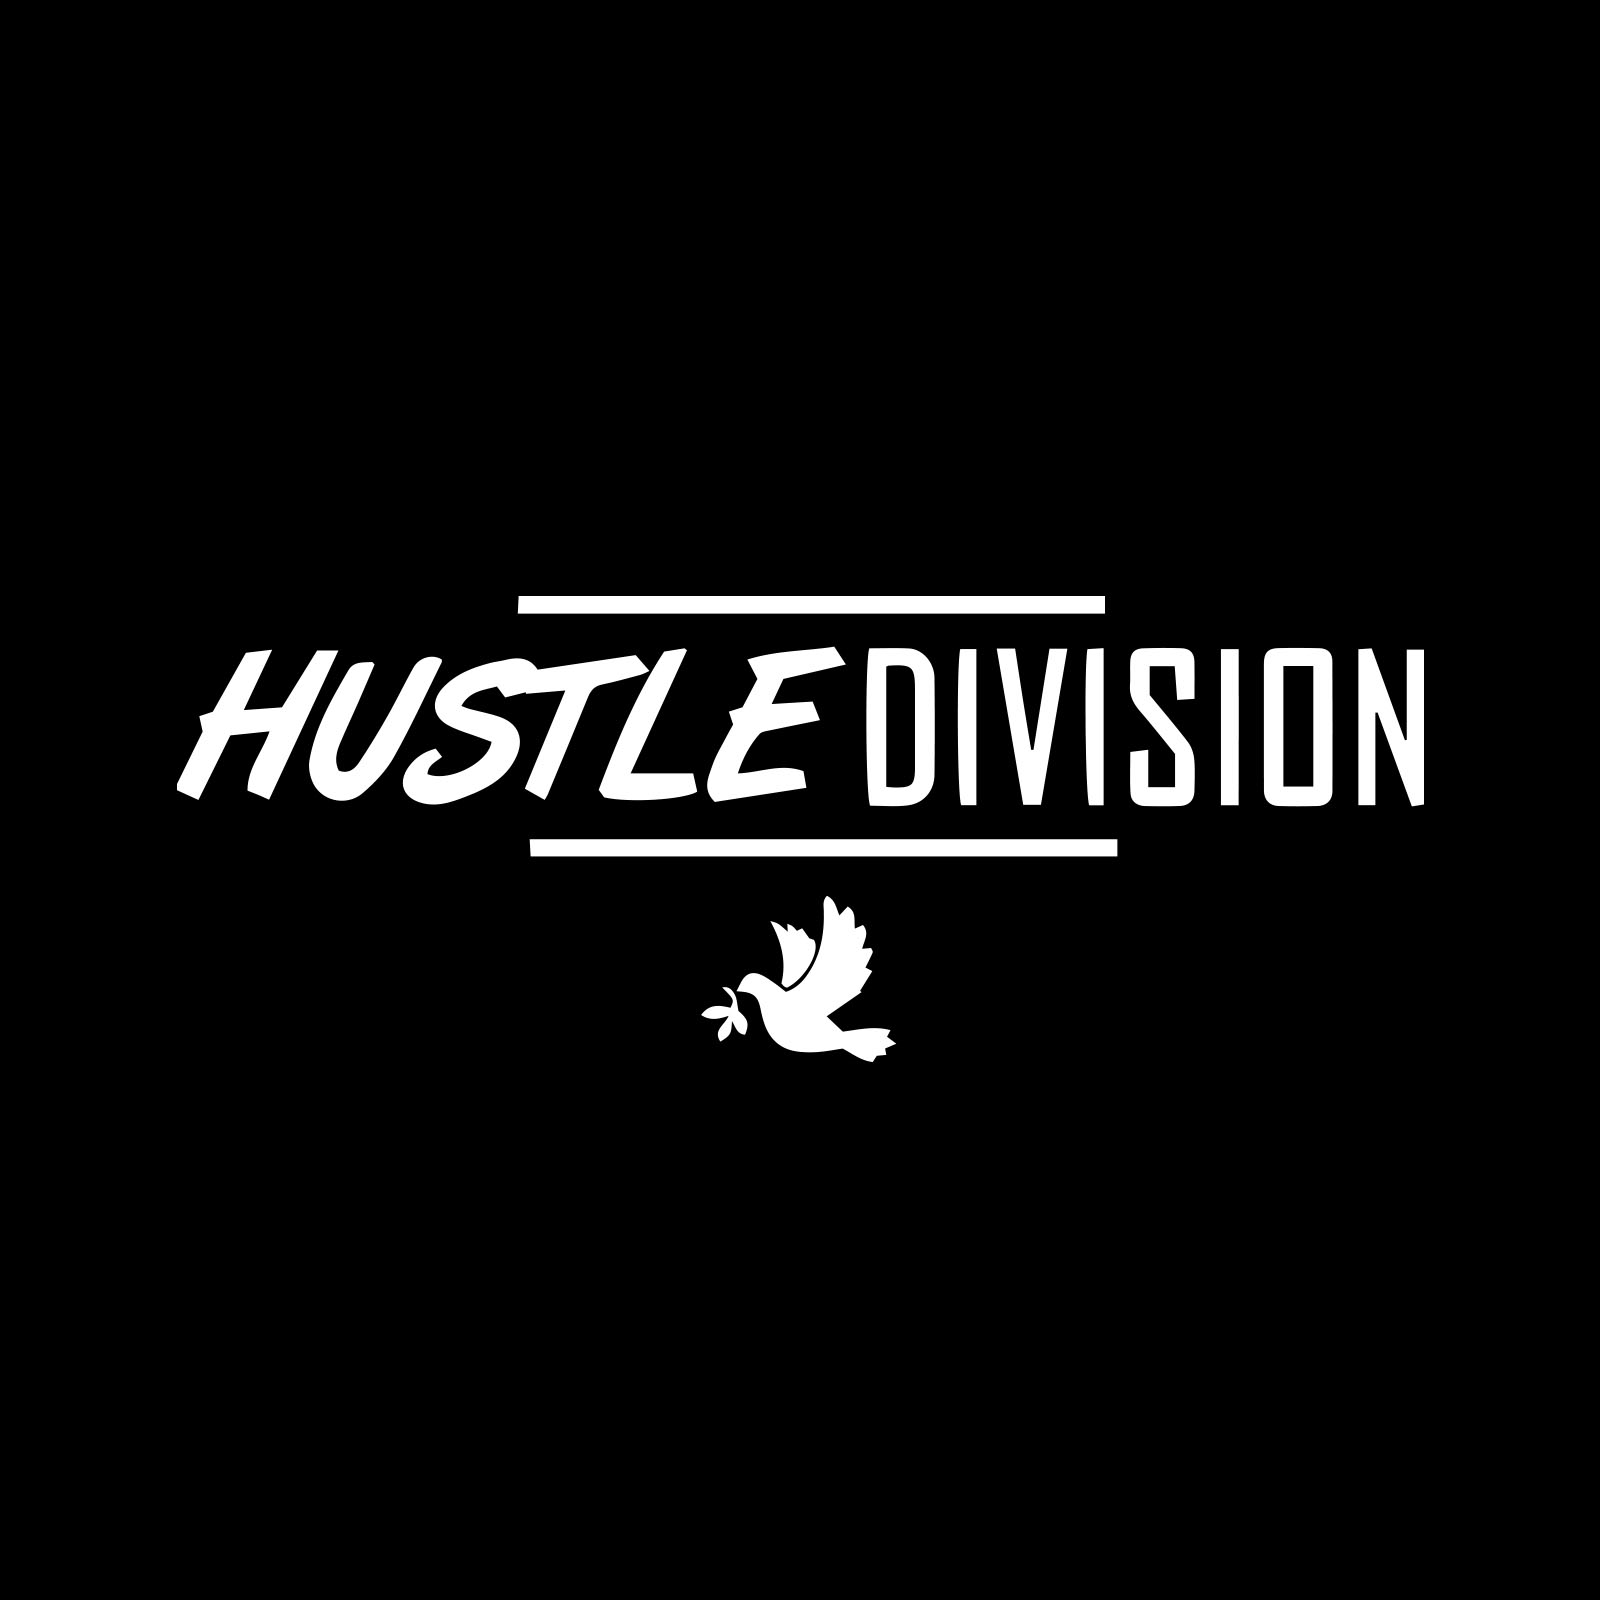 Hustle Division , Monday, September 23, 2019, Press release picture